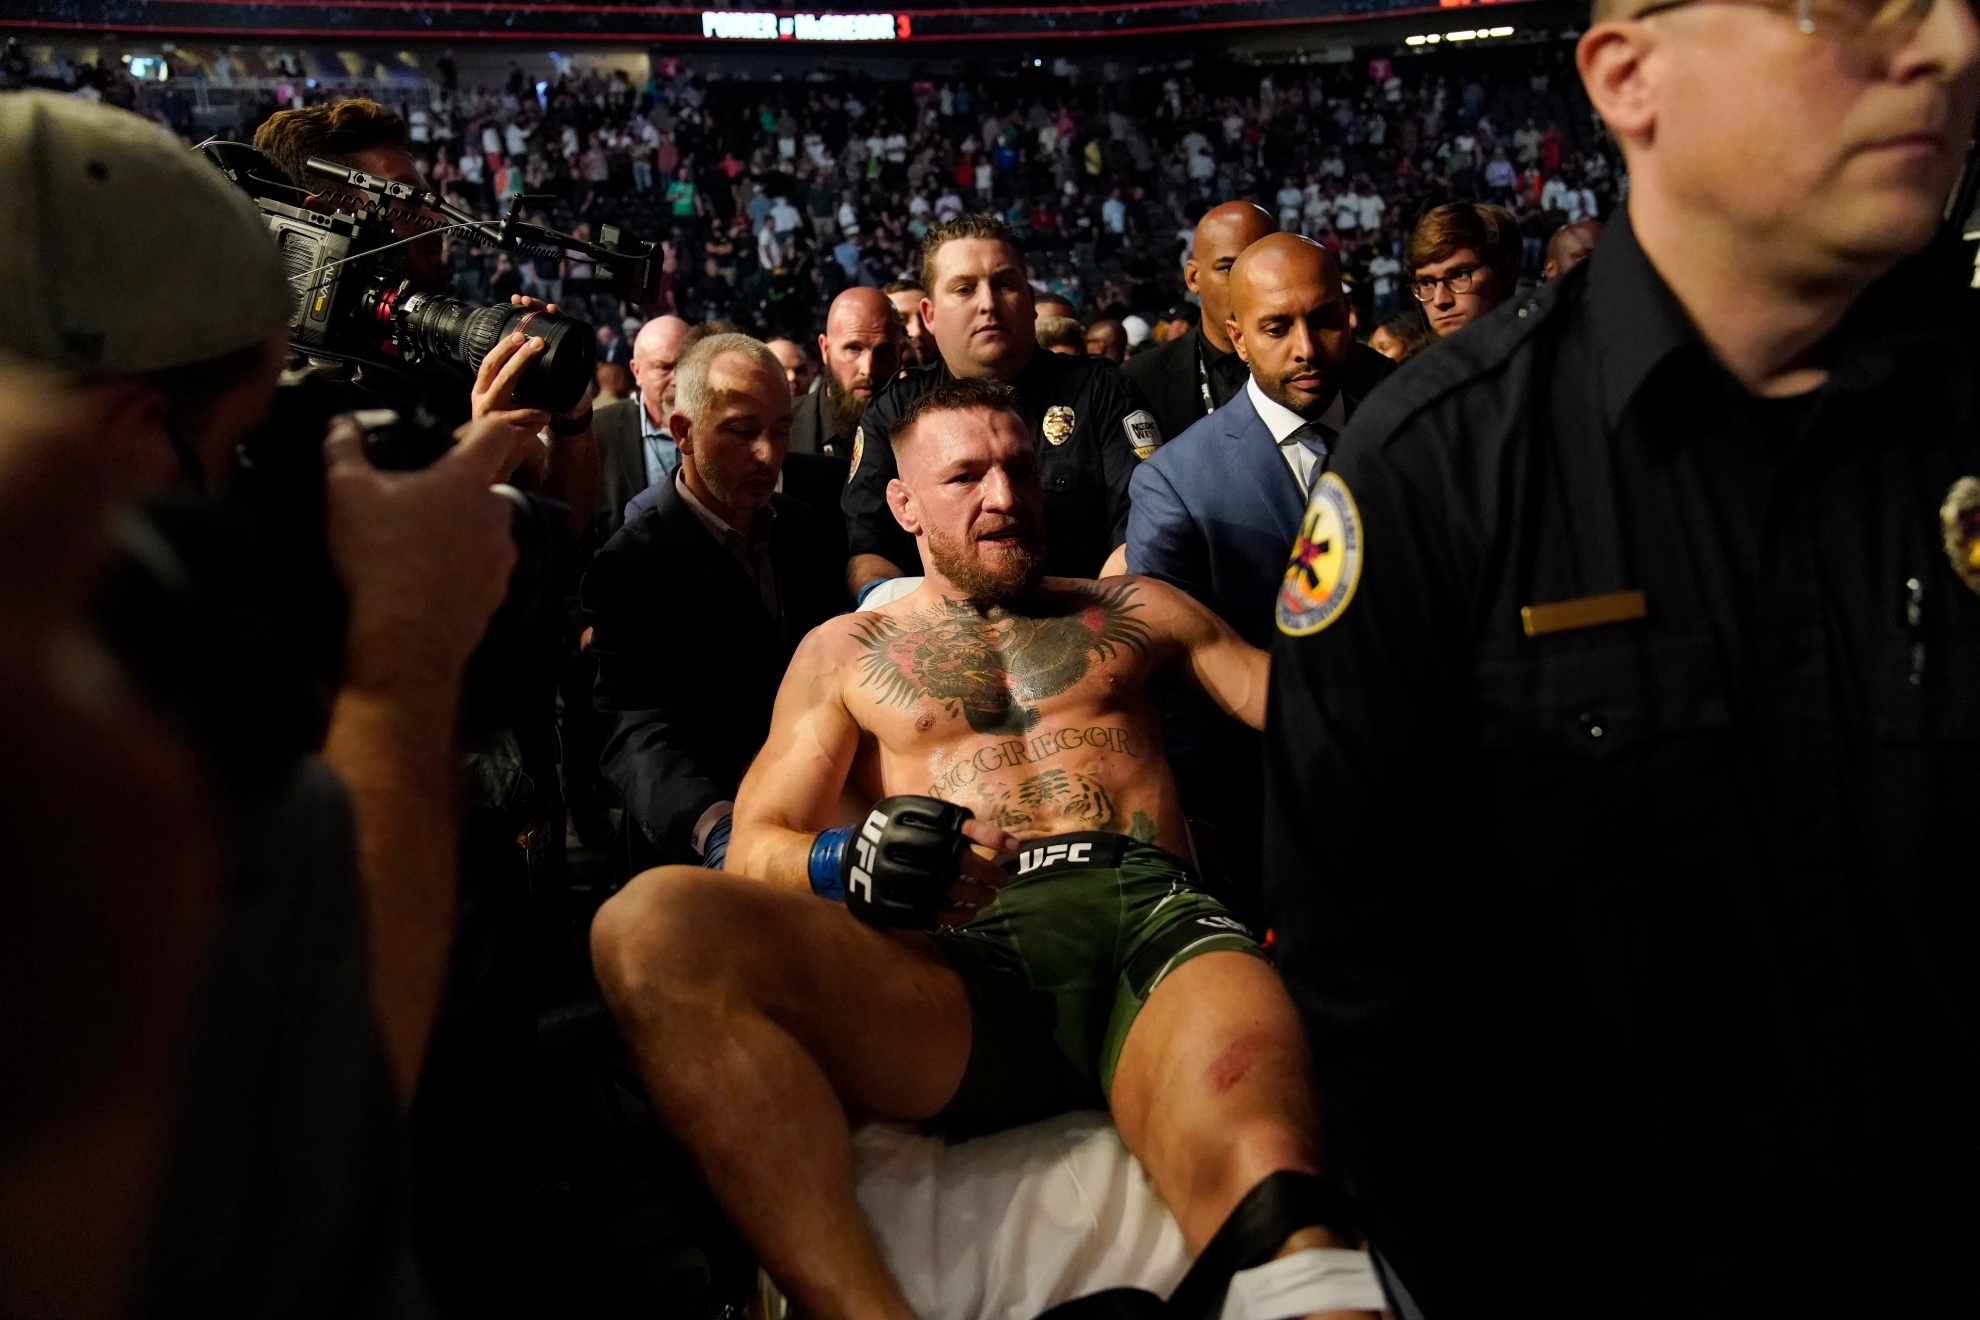 Conor McGregor gets injured at a UFC fight